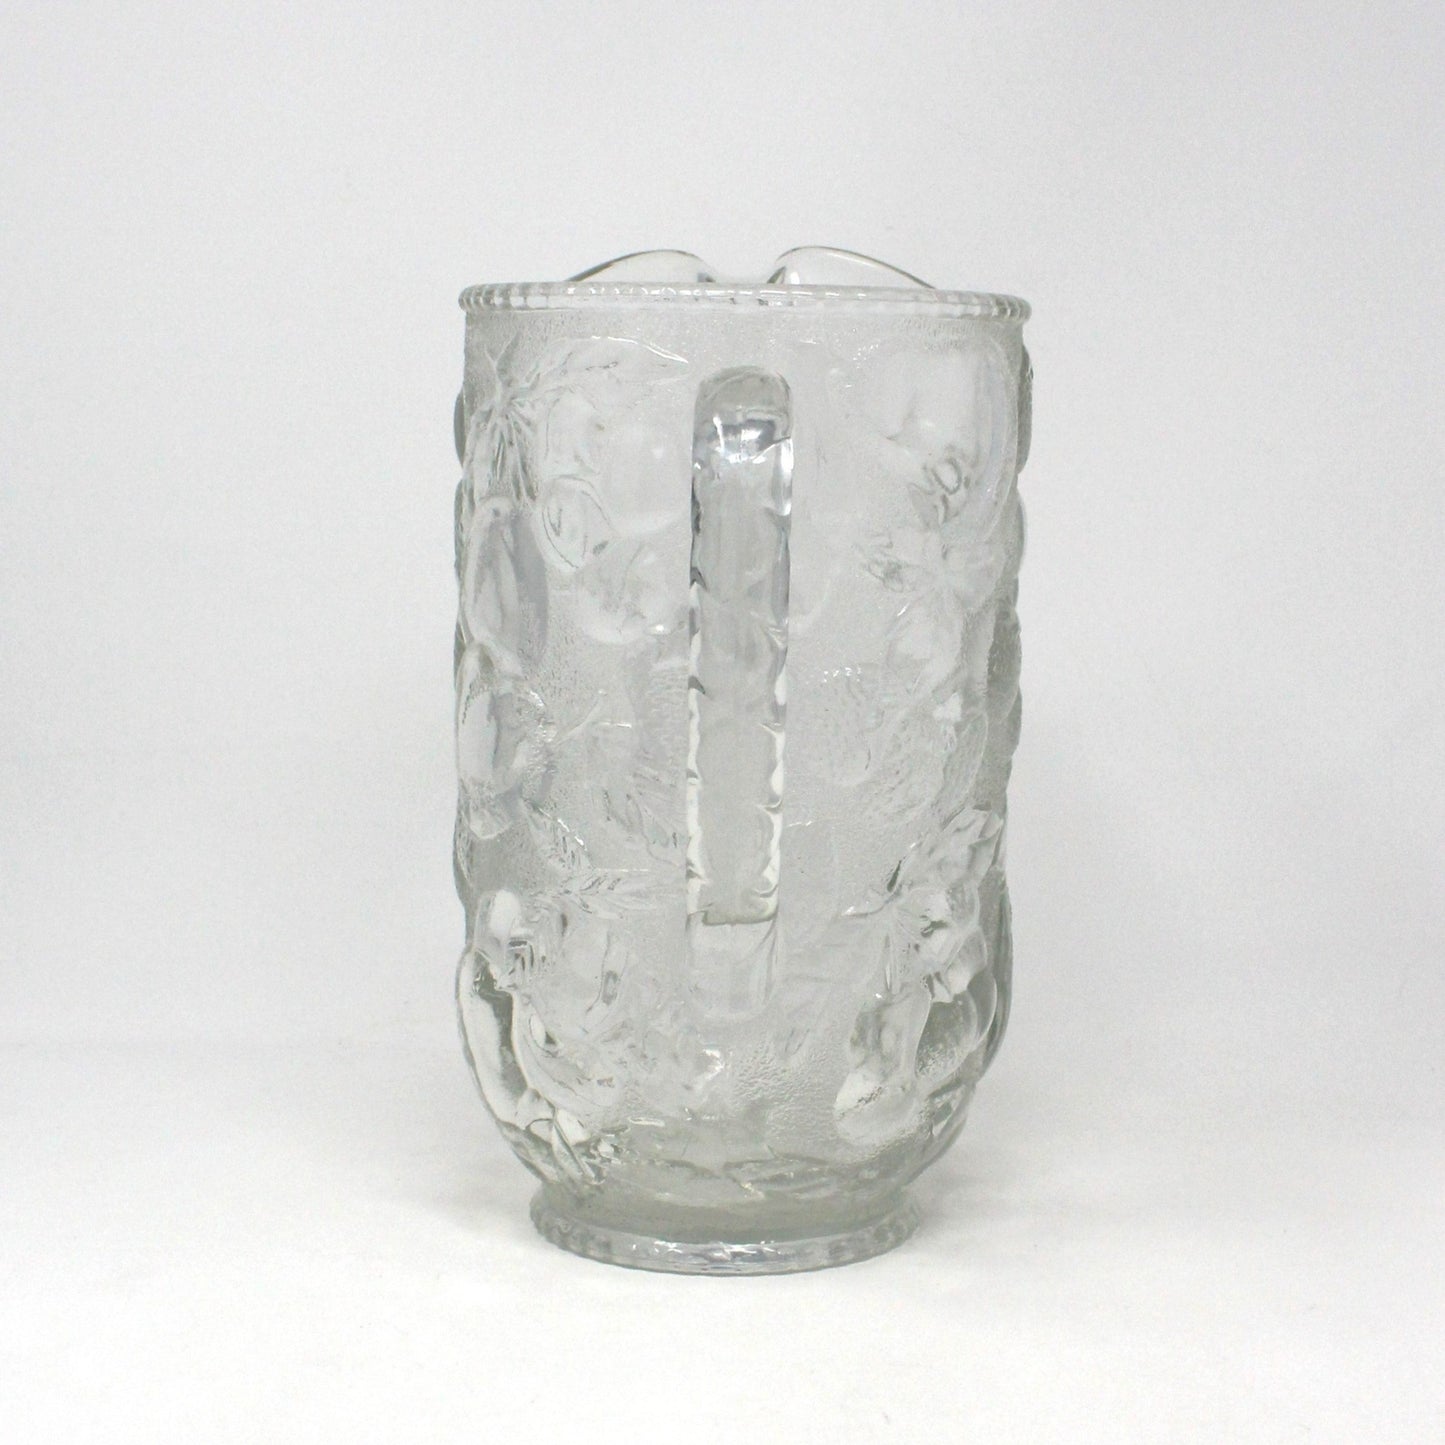 Pitcher, Libbey, Orchard Fruit Clear Glass, Embossed Fruits, Vintage